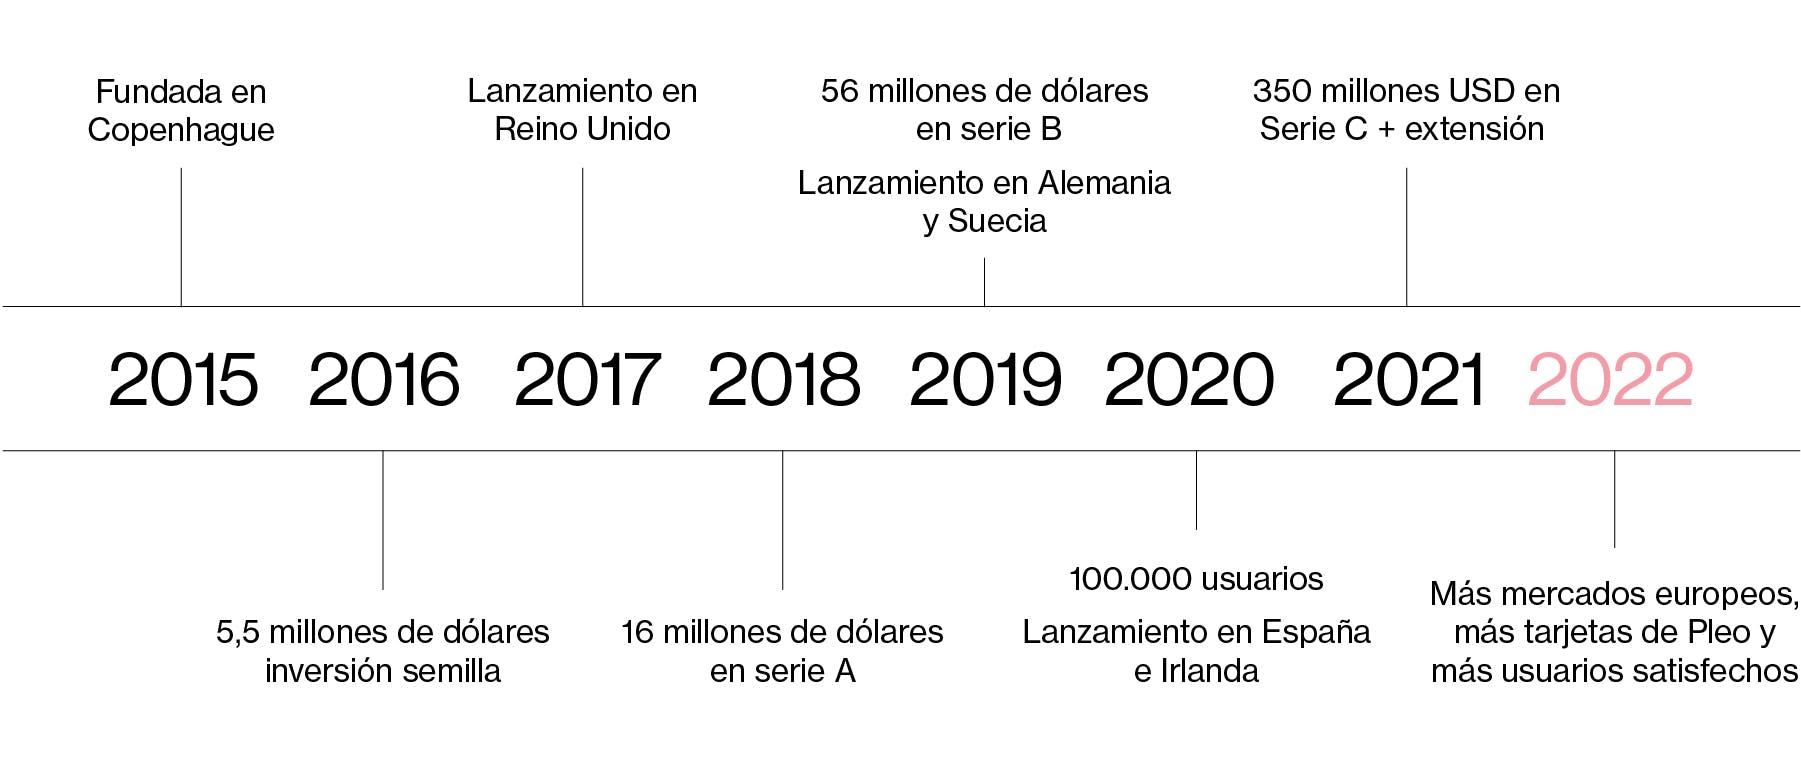 Pleo timeline from 2015 to 2022